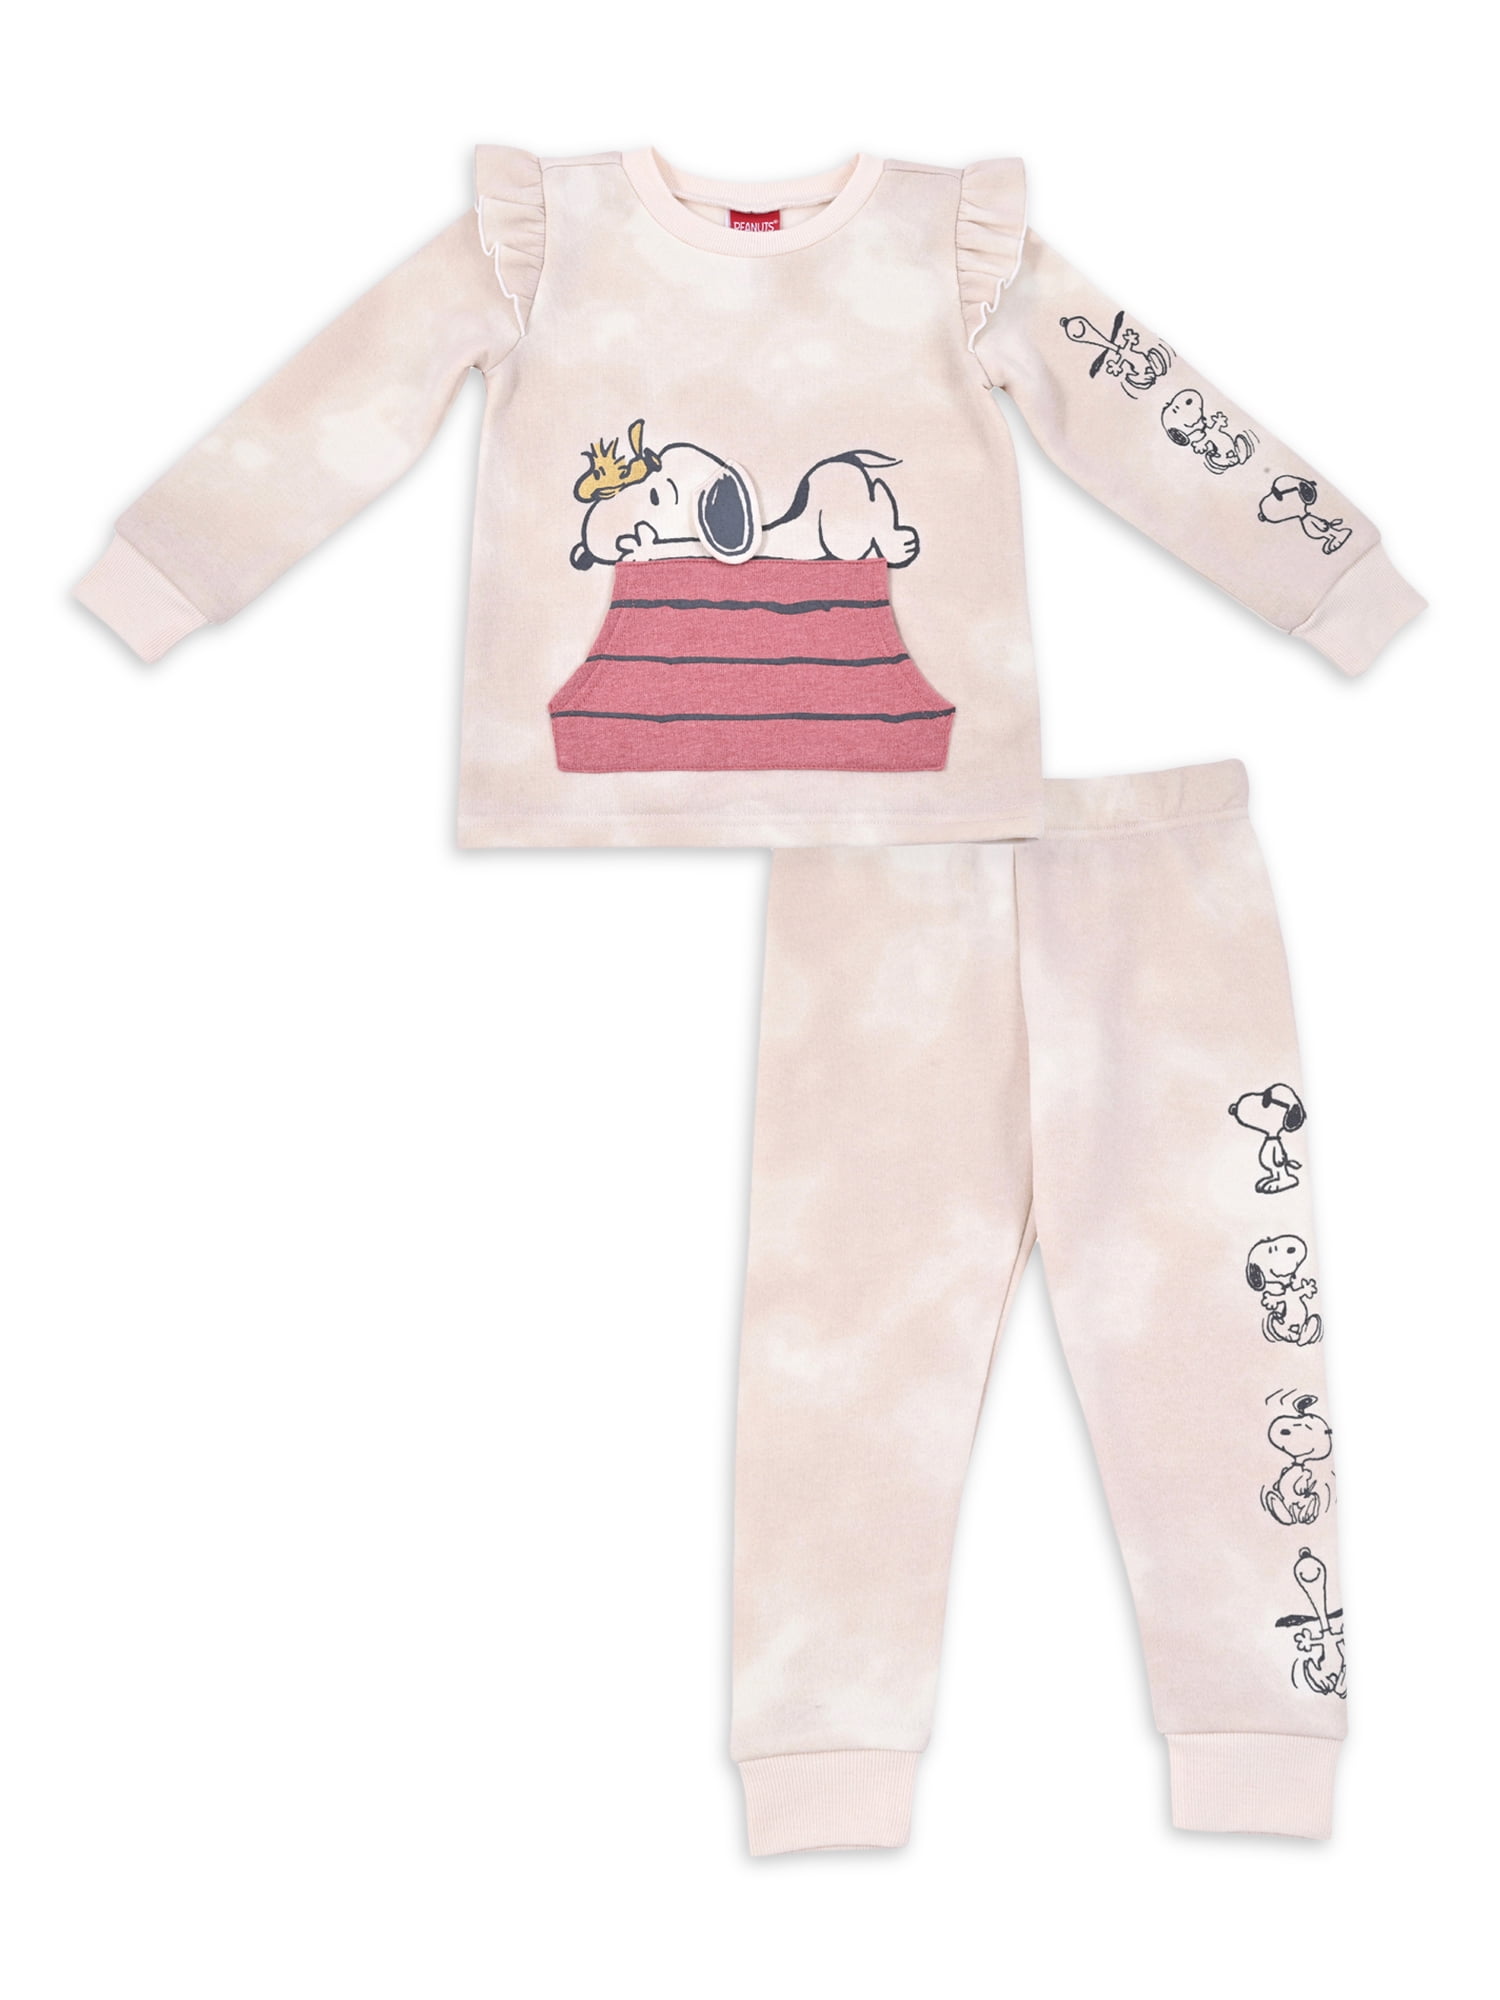 Peanuts Baby and Toddler Girl Jogger Pant and Crew Neck, 2 Piece Outfit Set, 12 Months-5T